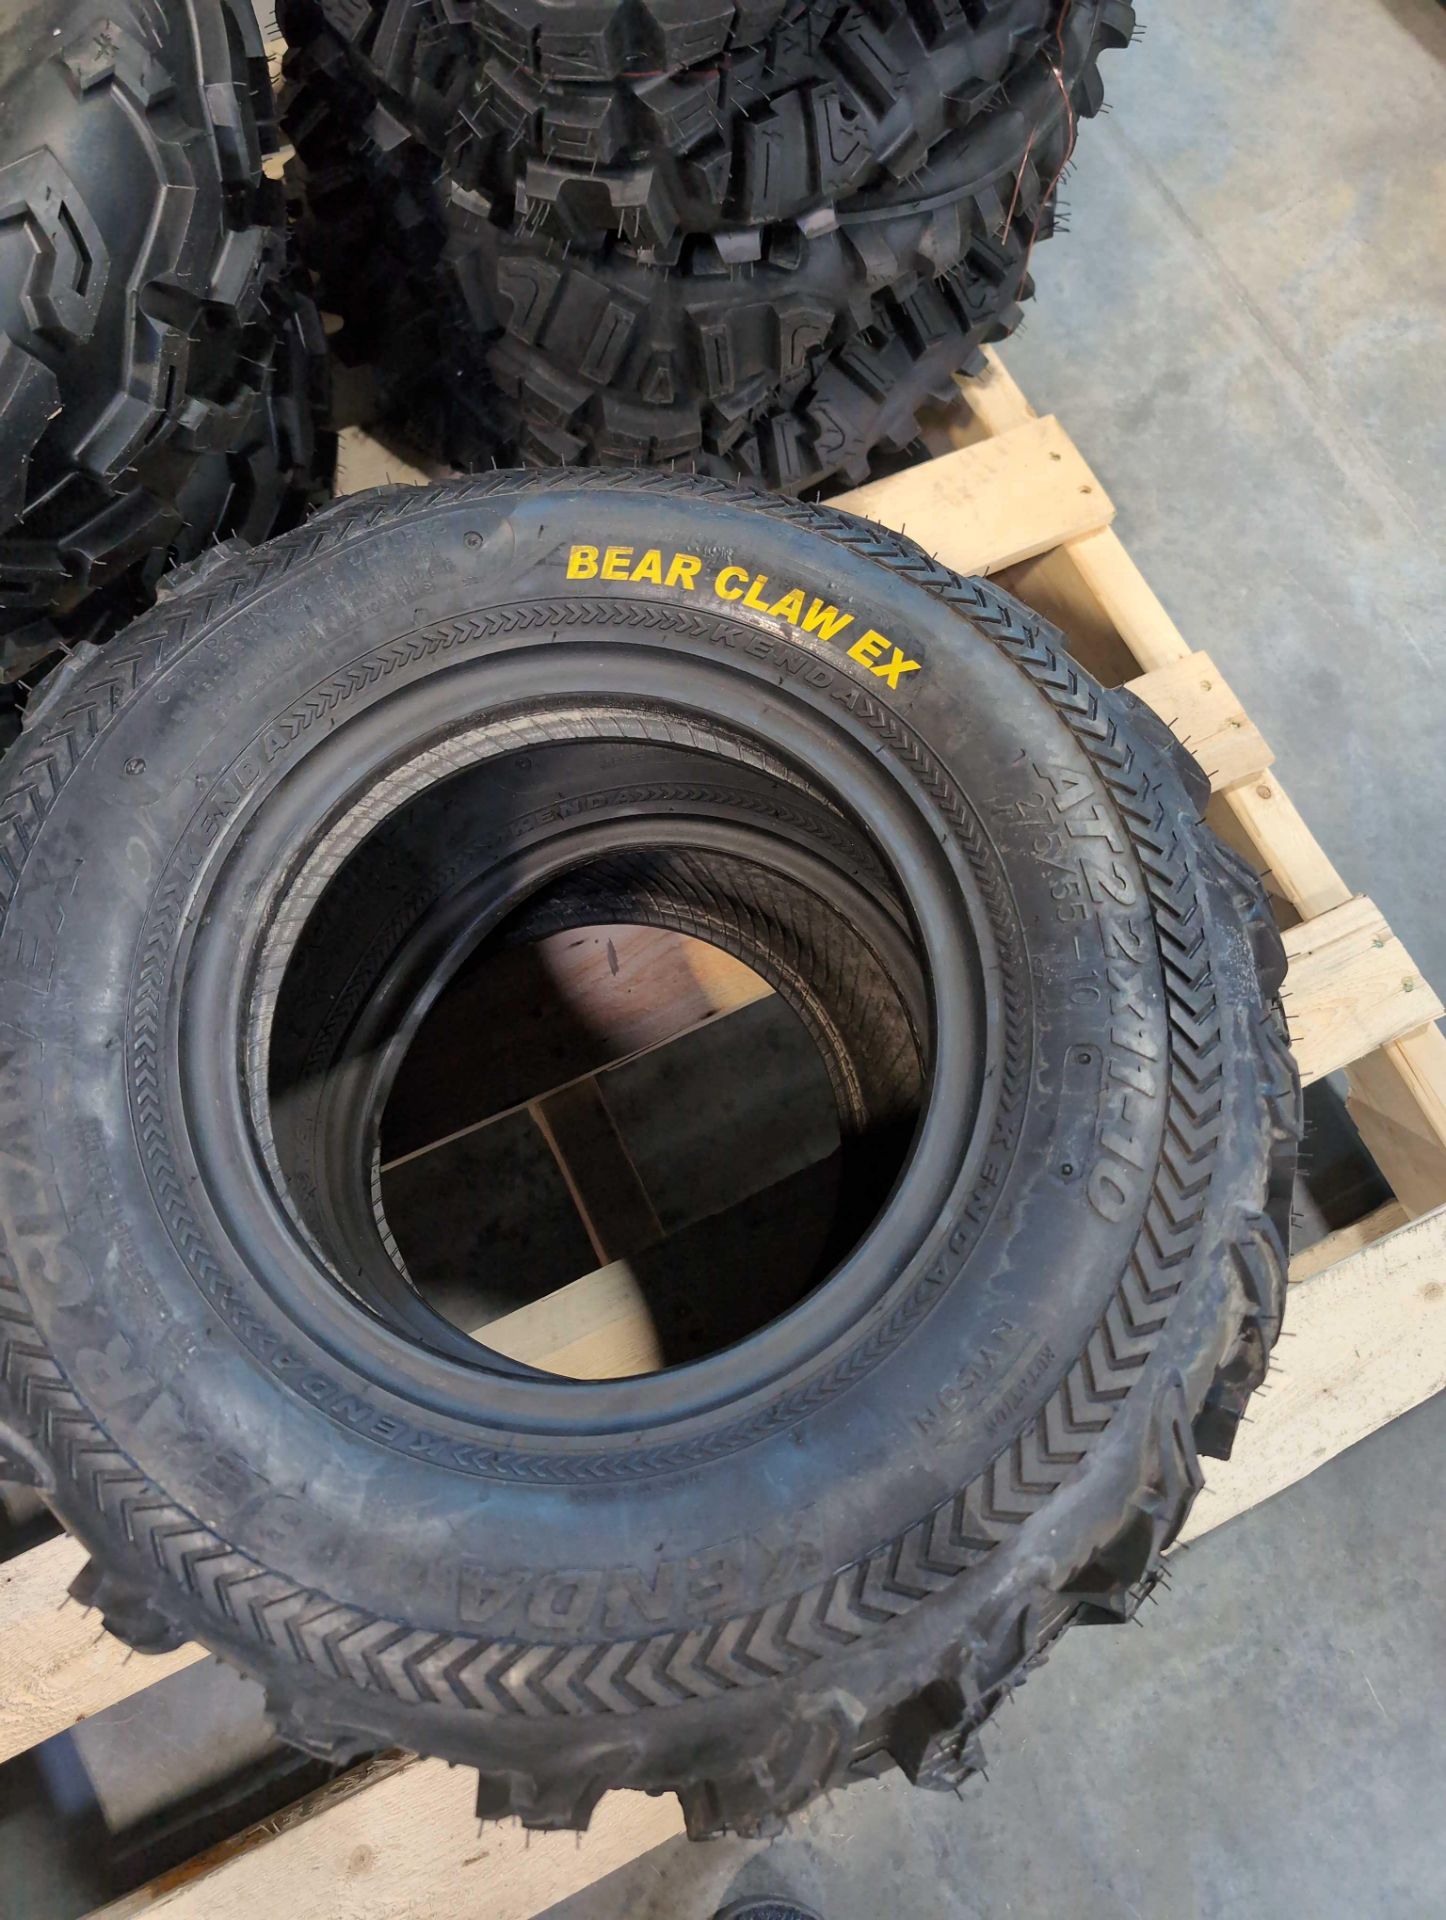 Tires: Bear Claw EX AT2 2x11-10, Halber AT25x8-12 and MASSFX AT 23x11-10 - Image 2 of 8